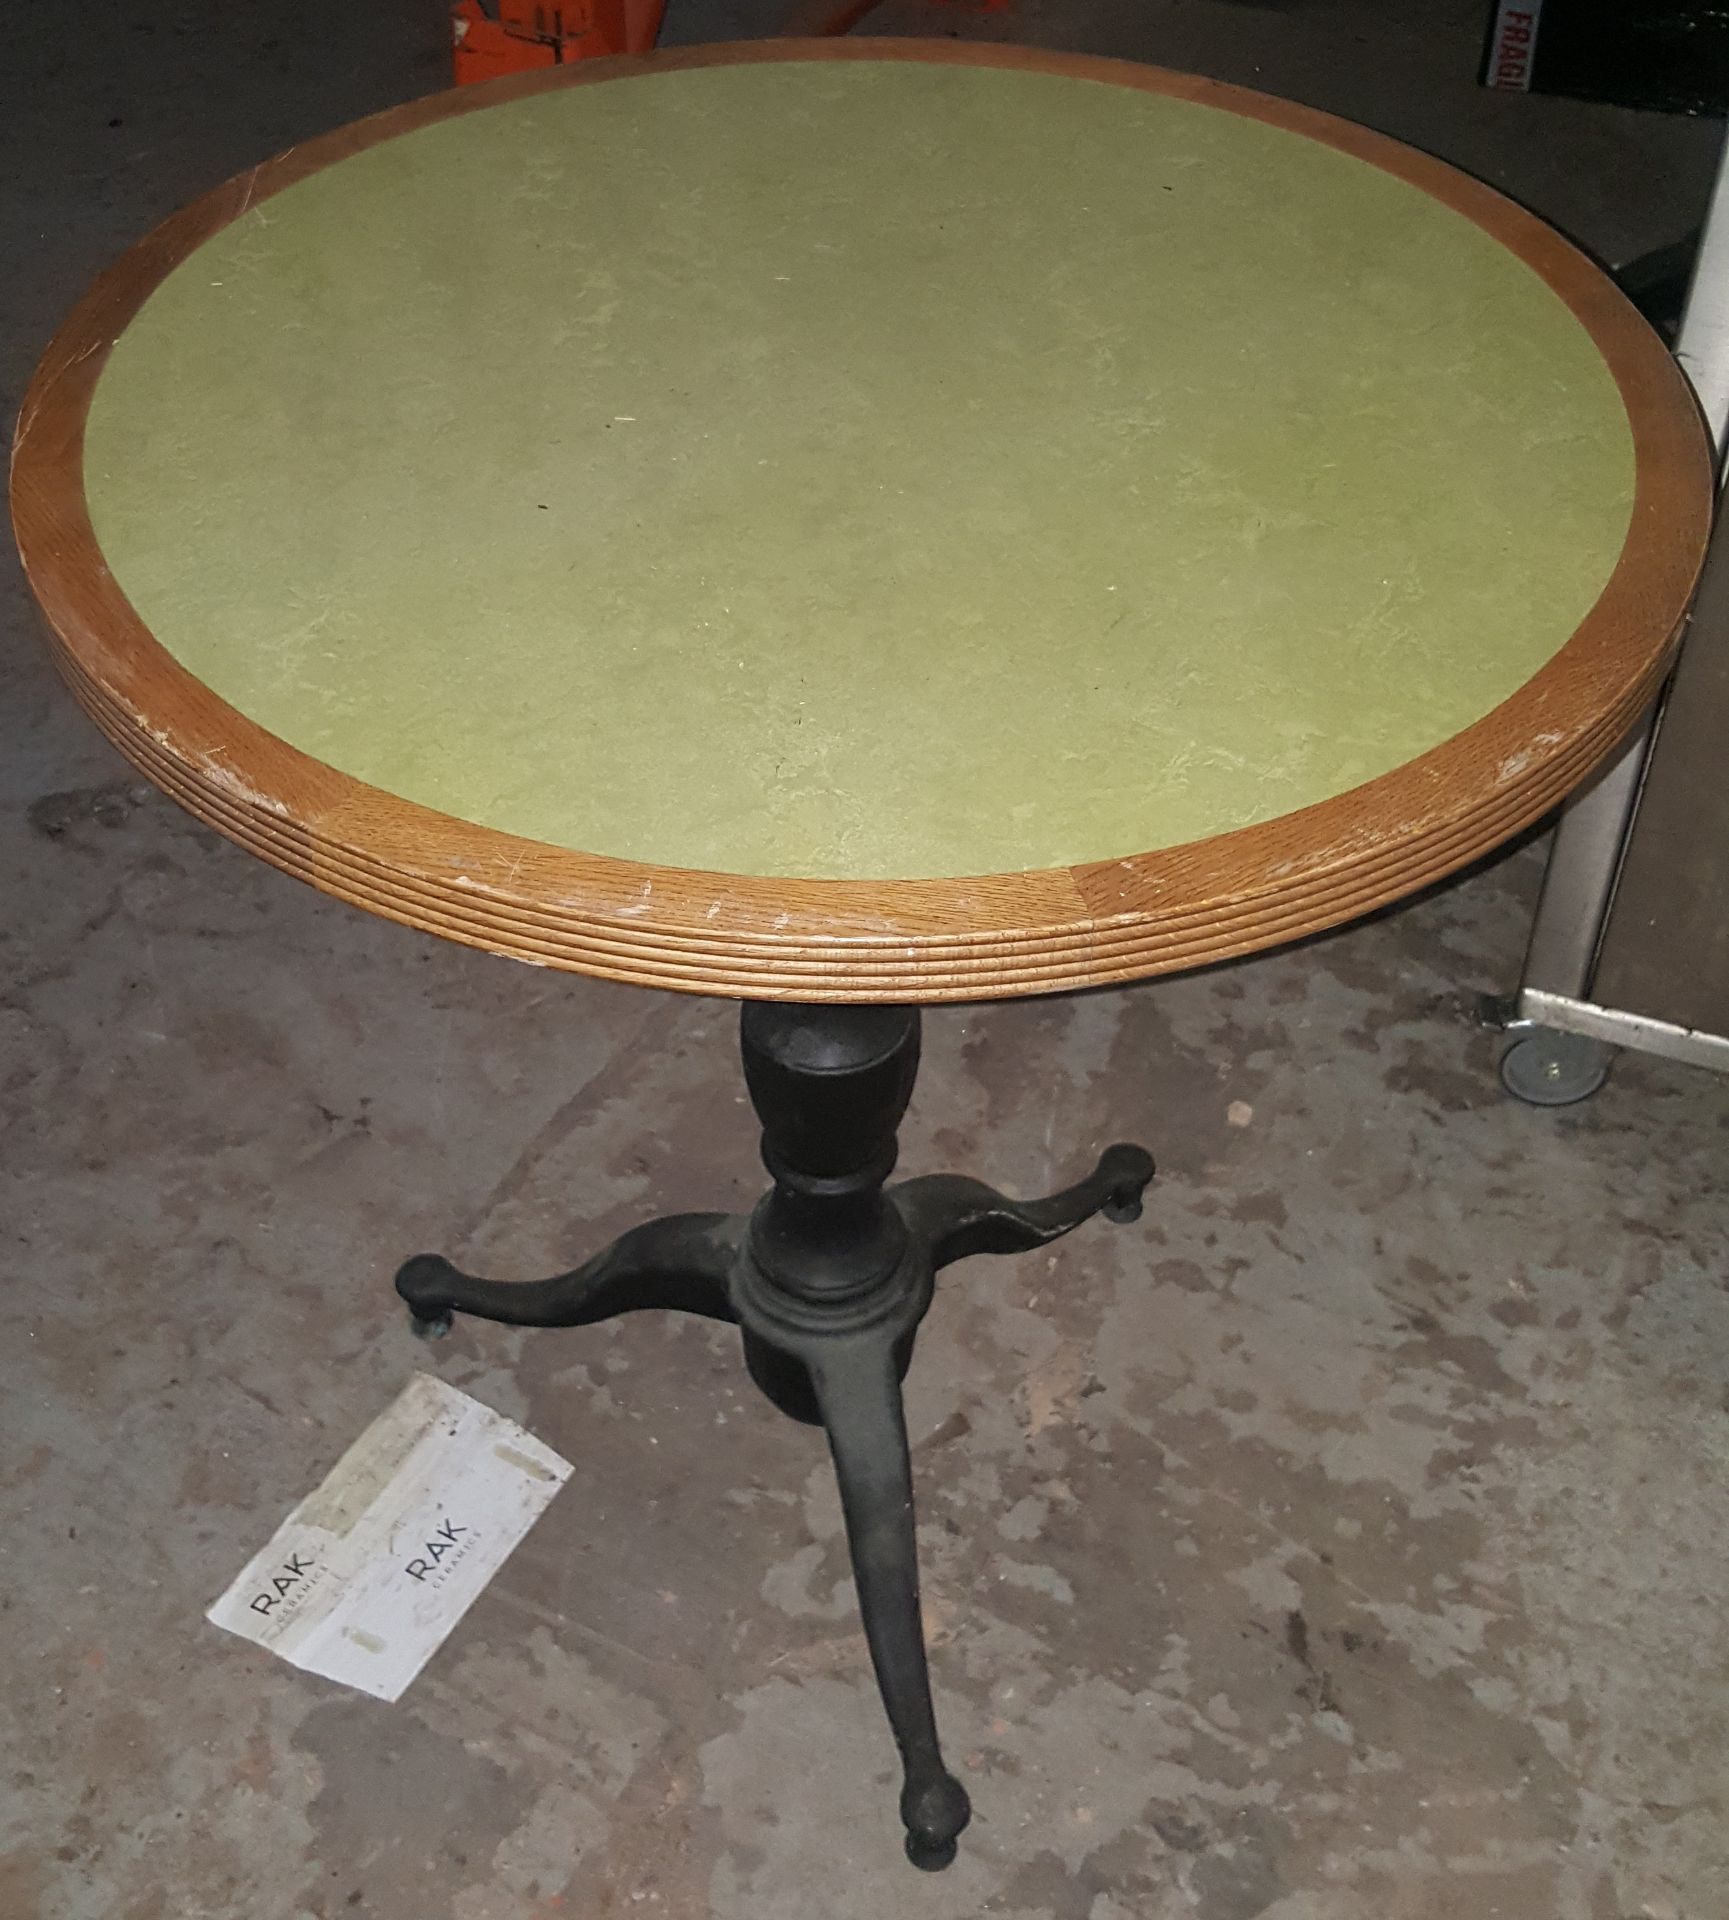 3 x Assorted Bistro Restaurant Tables With Green Faux Leather Inserts And Three-Legged Base - Image 9 of 9